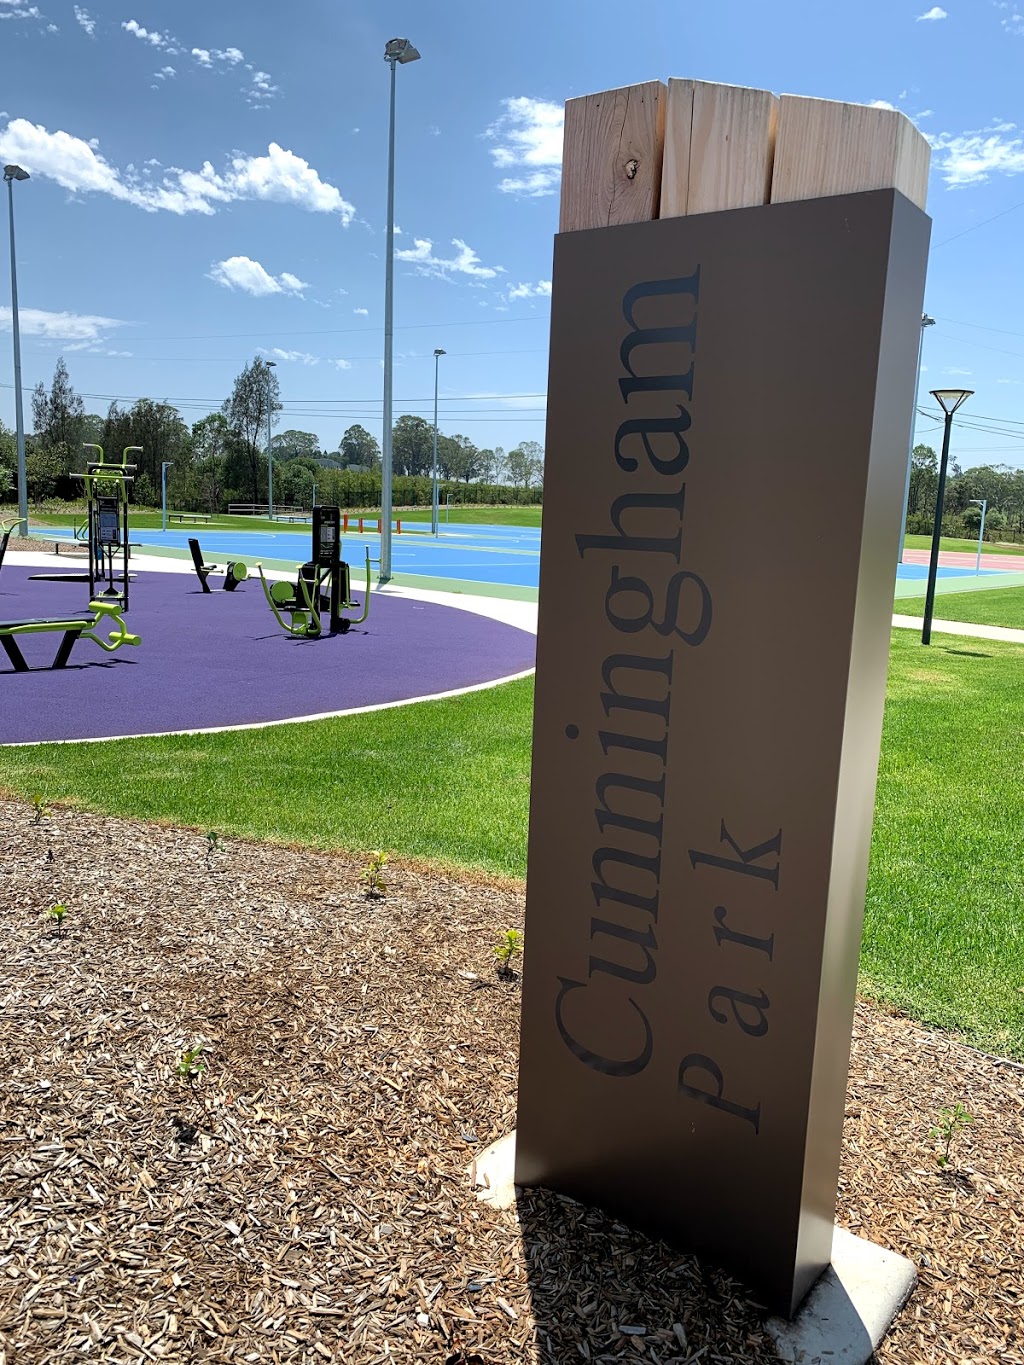 Cunningham Park Public Basketball and Netball Courts Gregory Hills